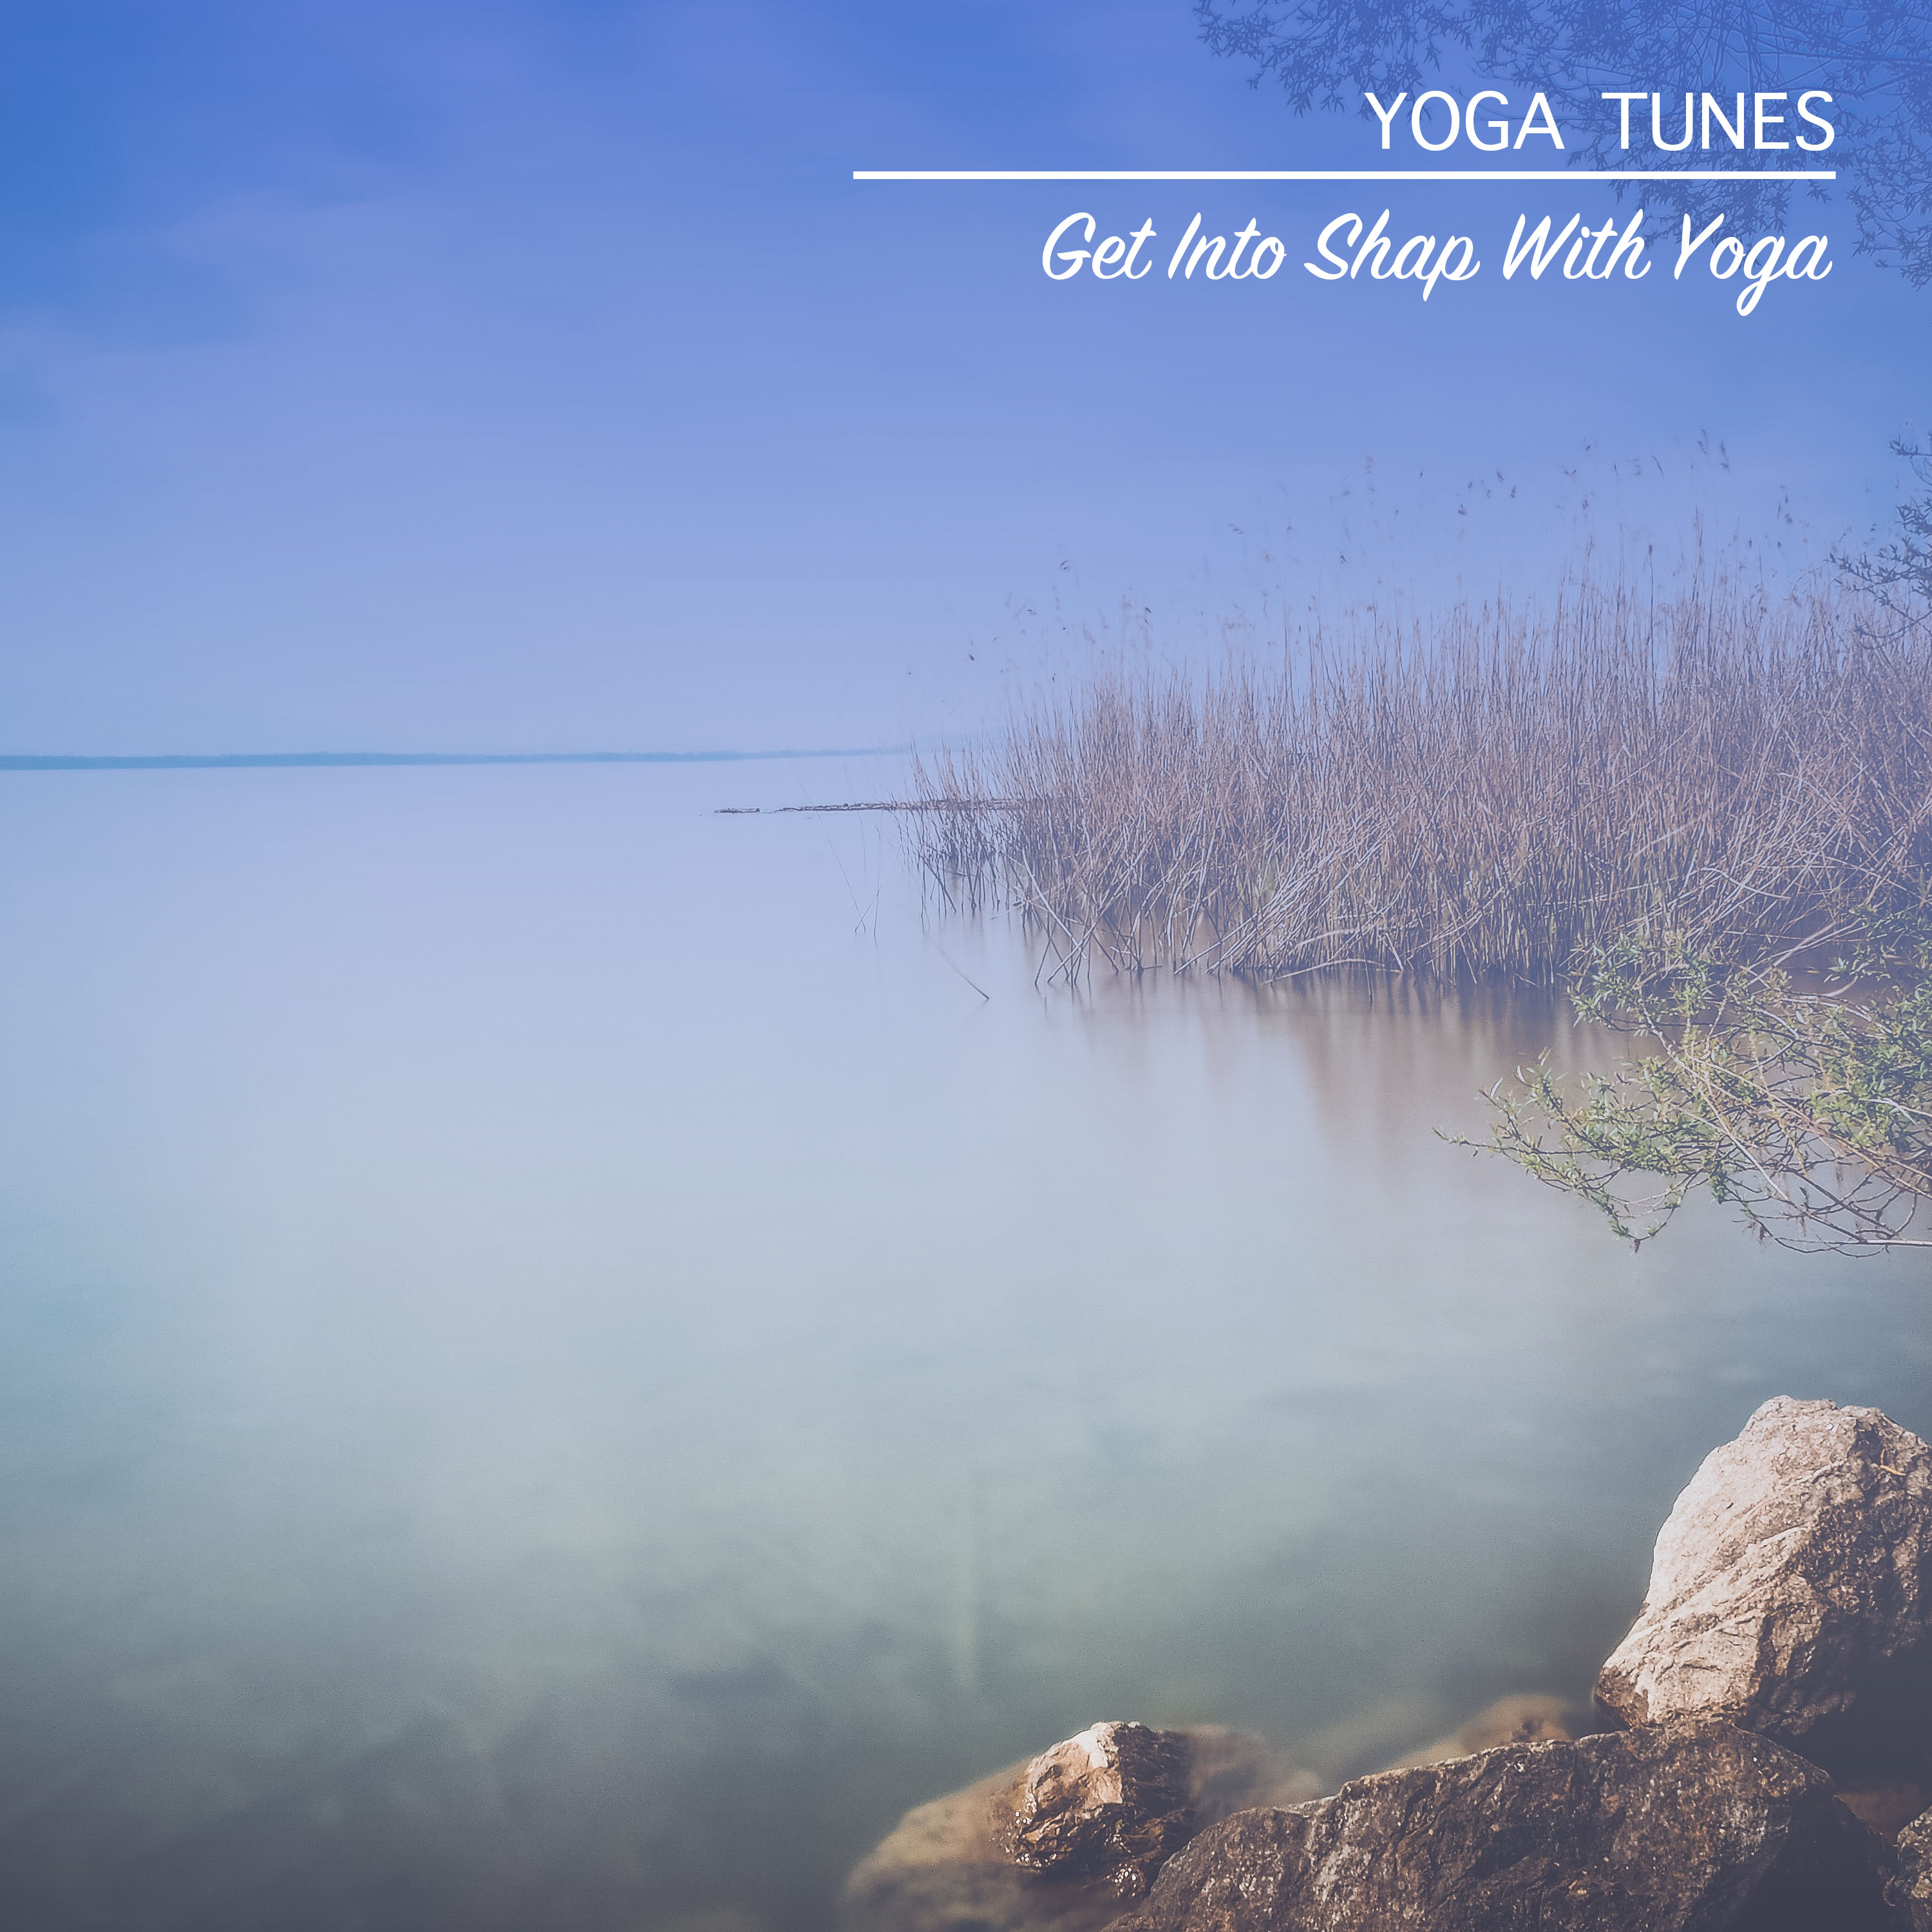 15 Yoga Tunes - Get Into Shape with Yoga